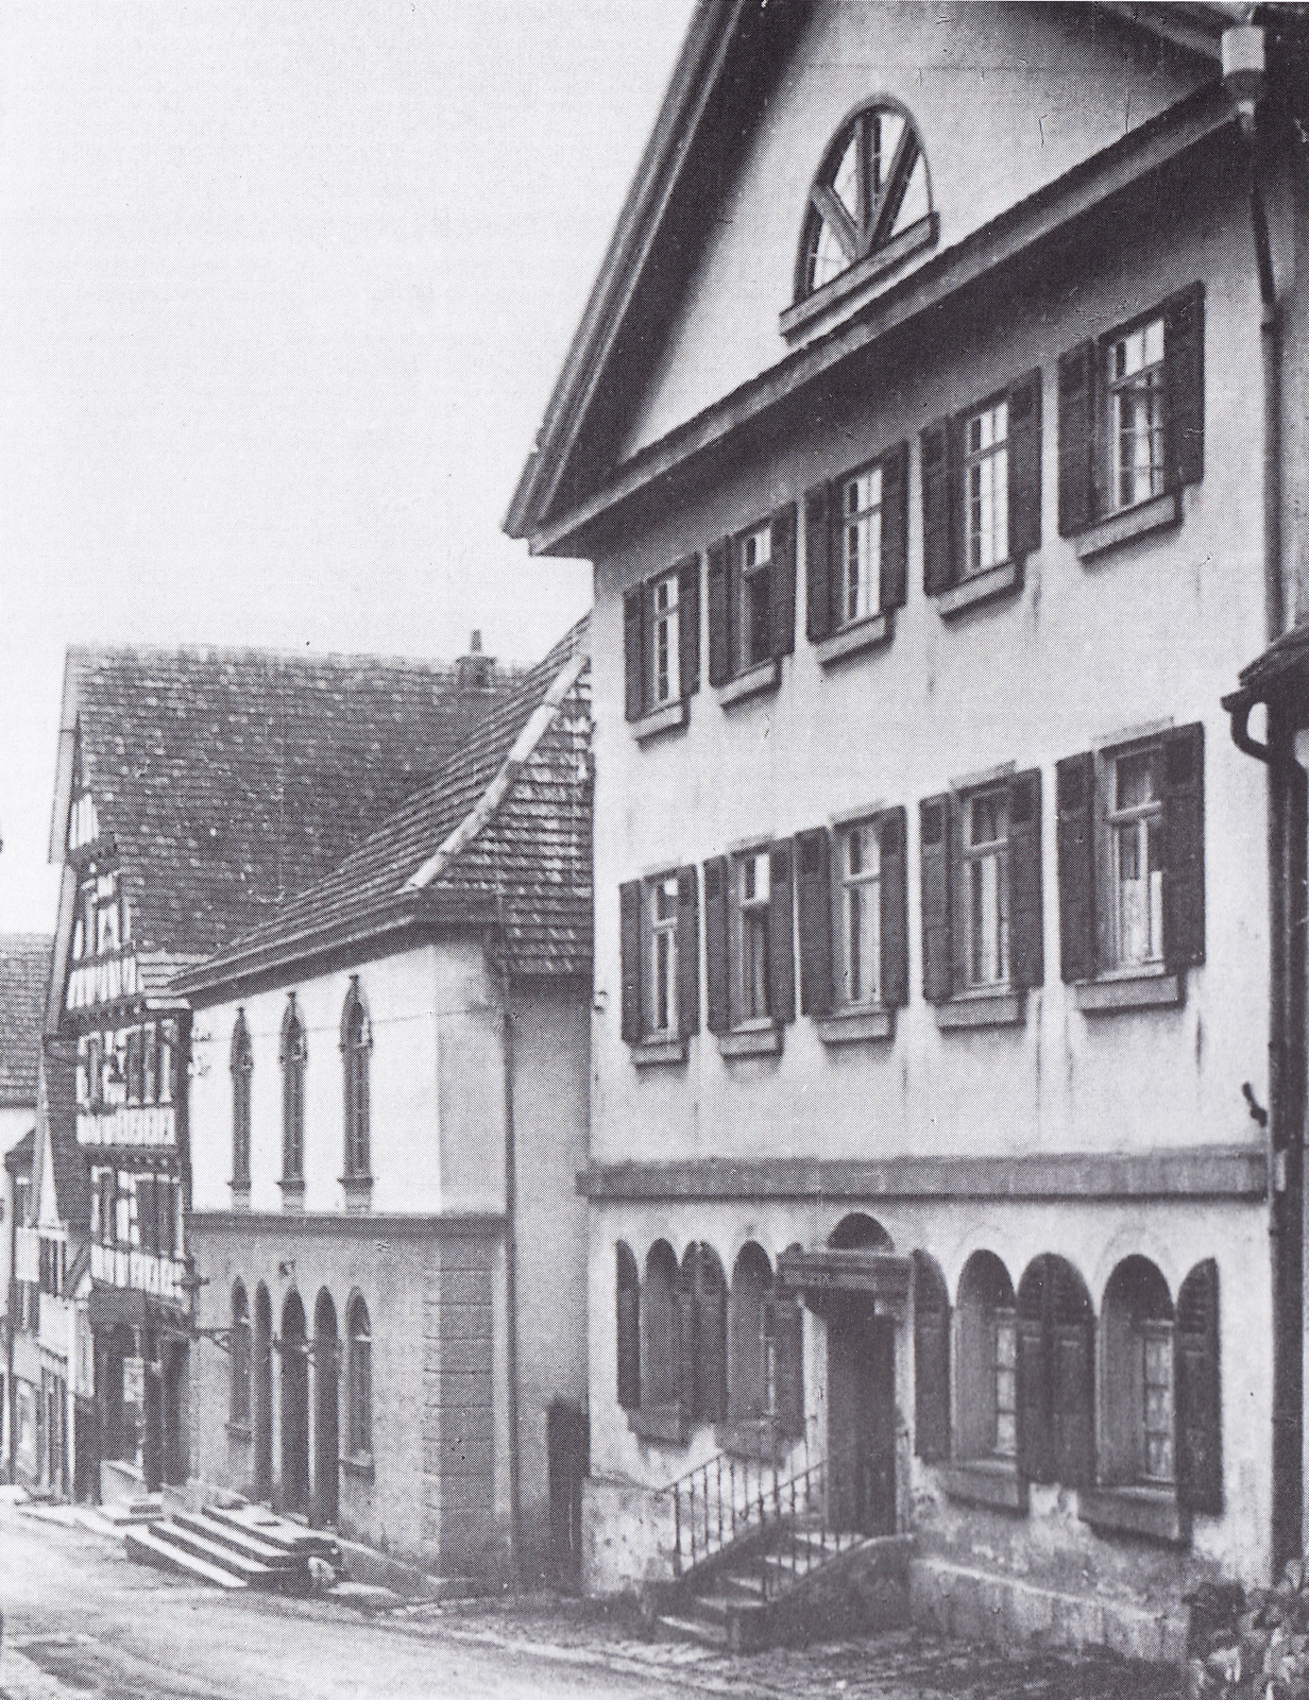 Hechingen synagogue and Jewish community center.